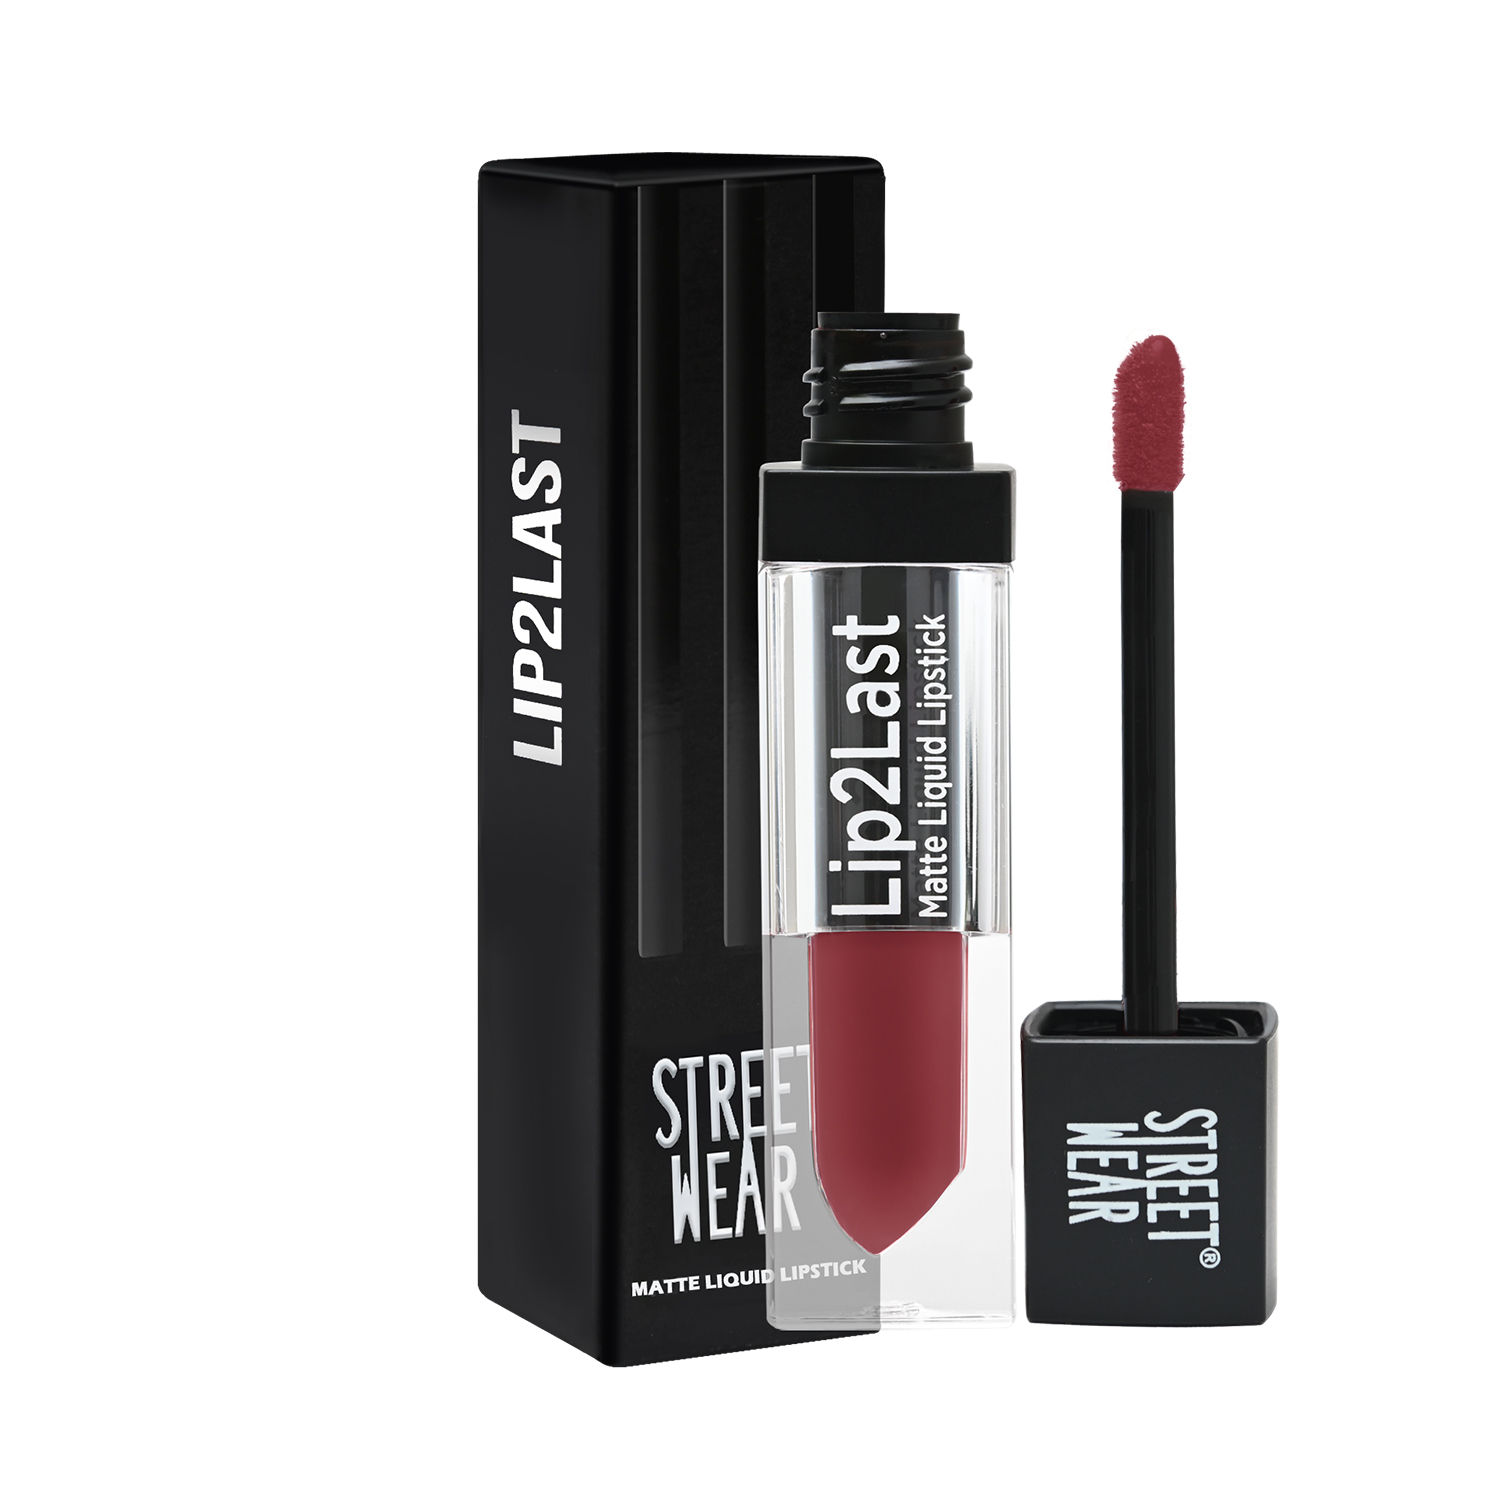 Buy STREET WEAR® Lip2Last -Vacay Red (Red) - 5 ml -Matte Liquid Lipstick, Transferproof, Smudgeproof, Mask Friendly, Non-Drying Formula, Full Coverage, Professional Grade Pigments, Featherweight Formulation, Enriched With Vitamin E - Lasts AM To PM! - Purplle